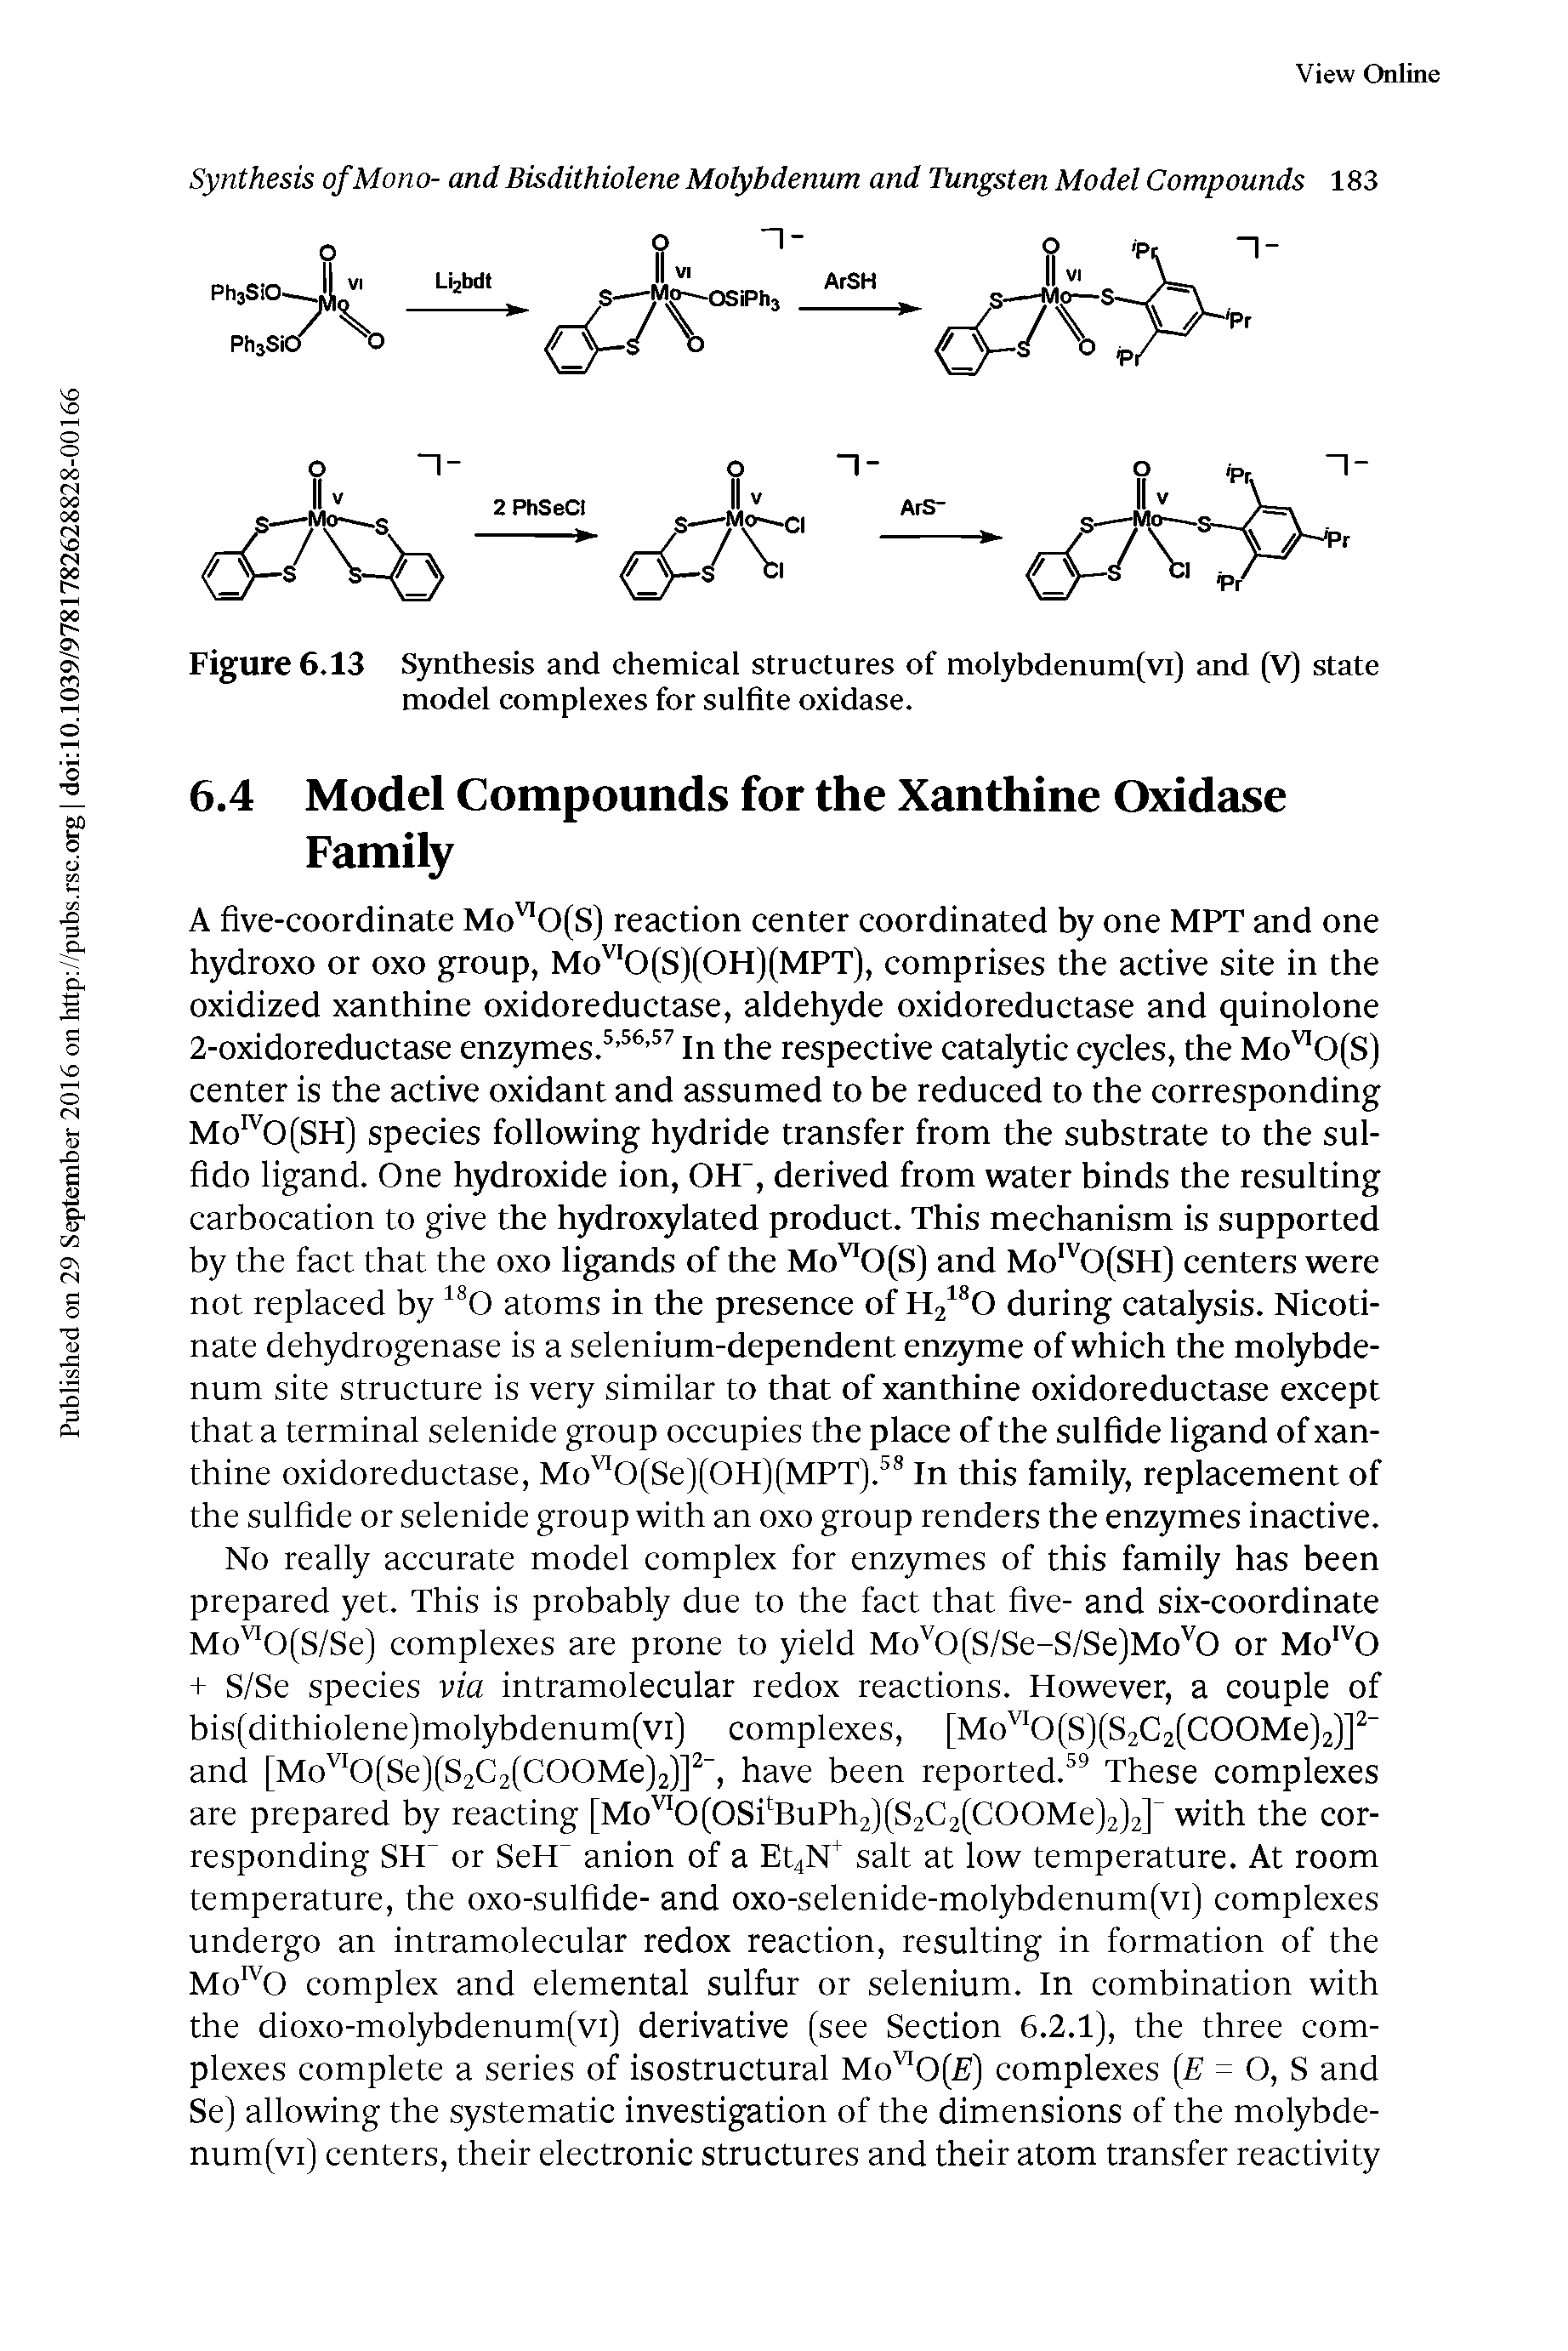 Figure 6.13 Synthesis and chemical structures of molybdenum(vi) and (V) state model complexes for sulfite oxidase.